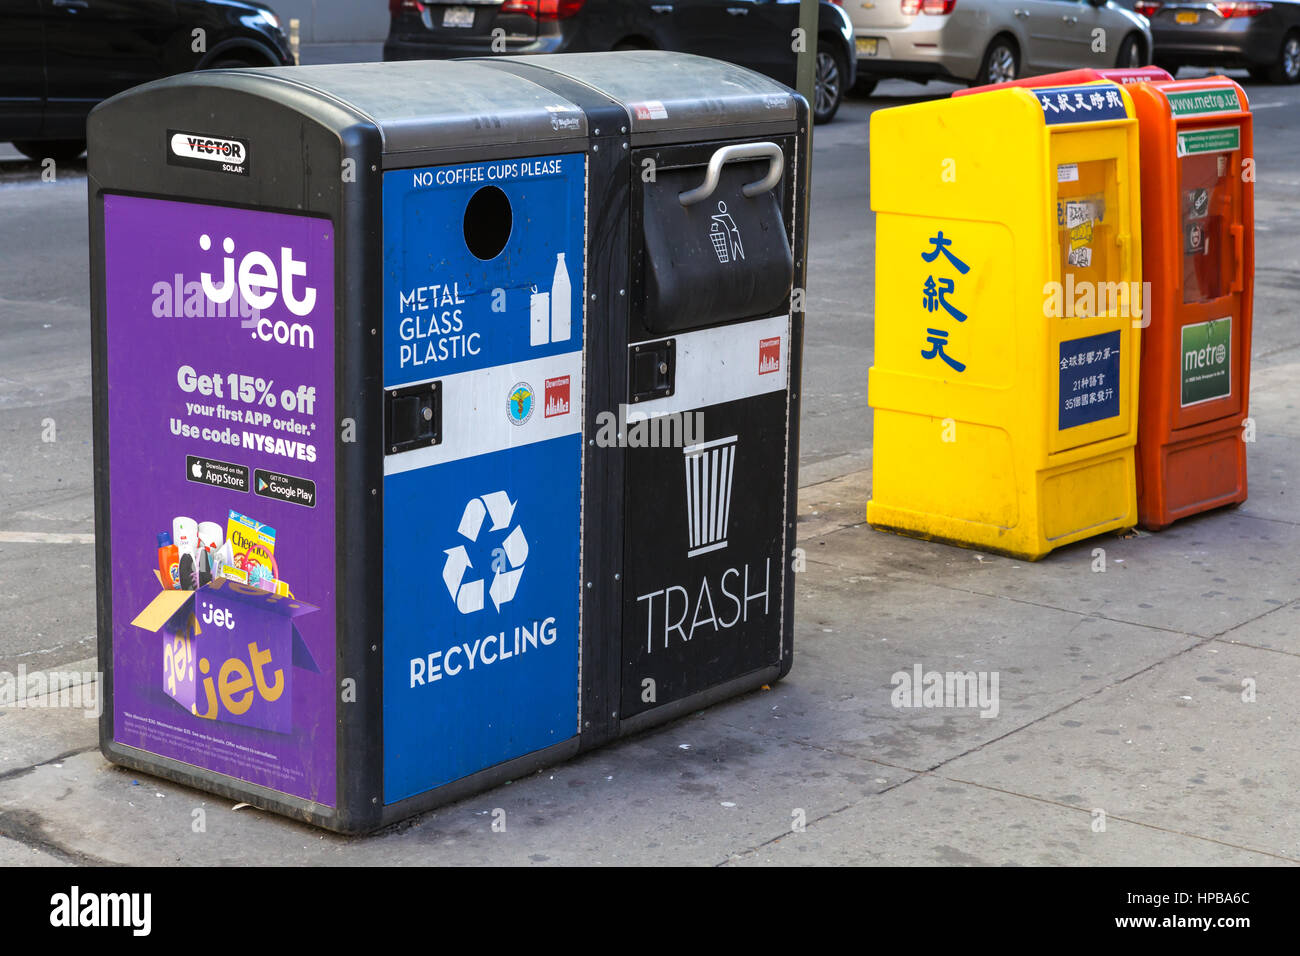 Solar-powered smart recycling and trash compactors deployed on a street in New York City. Stock Photo